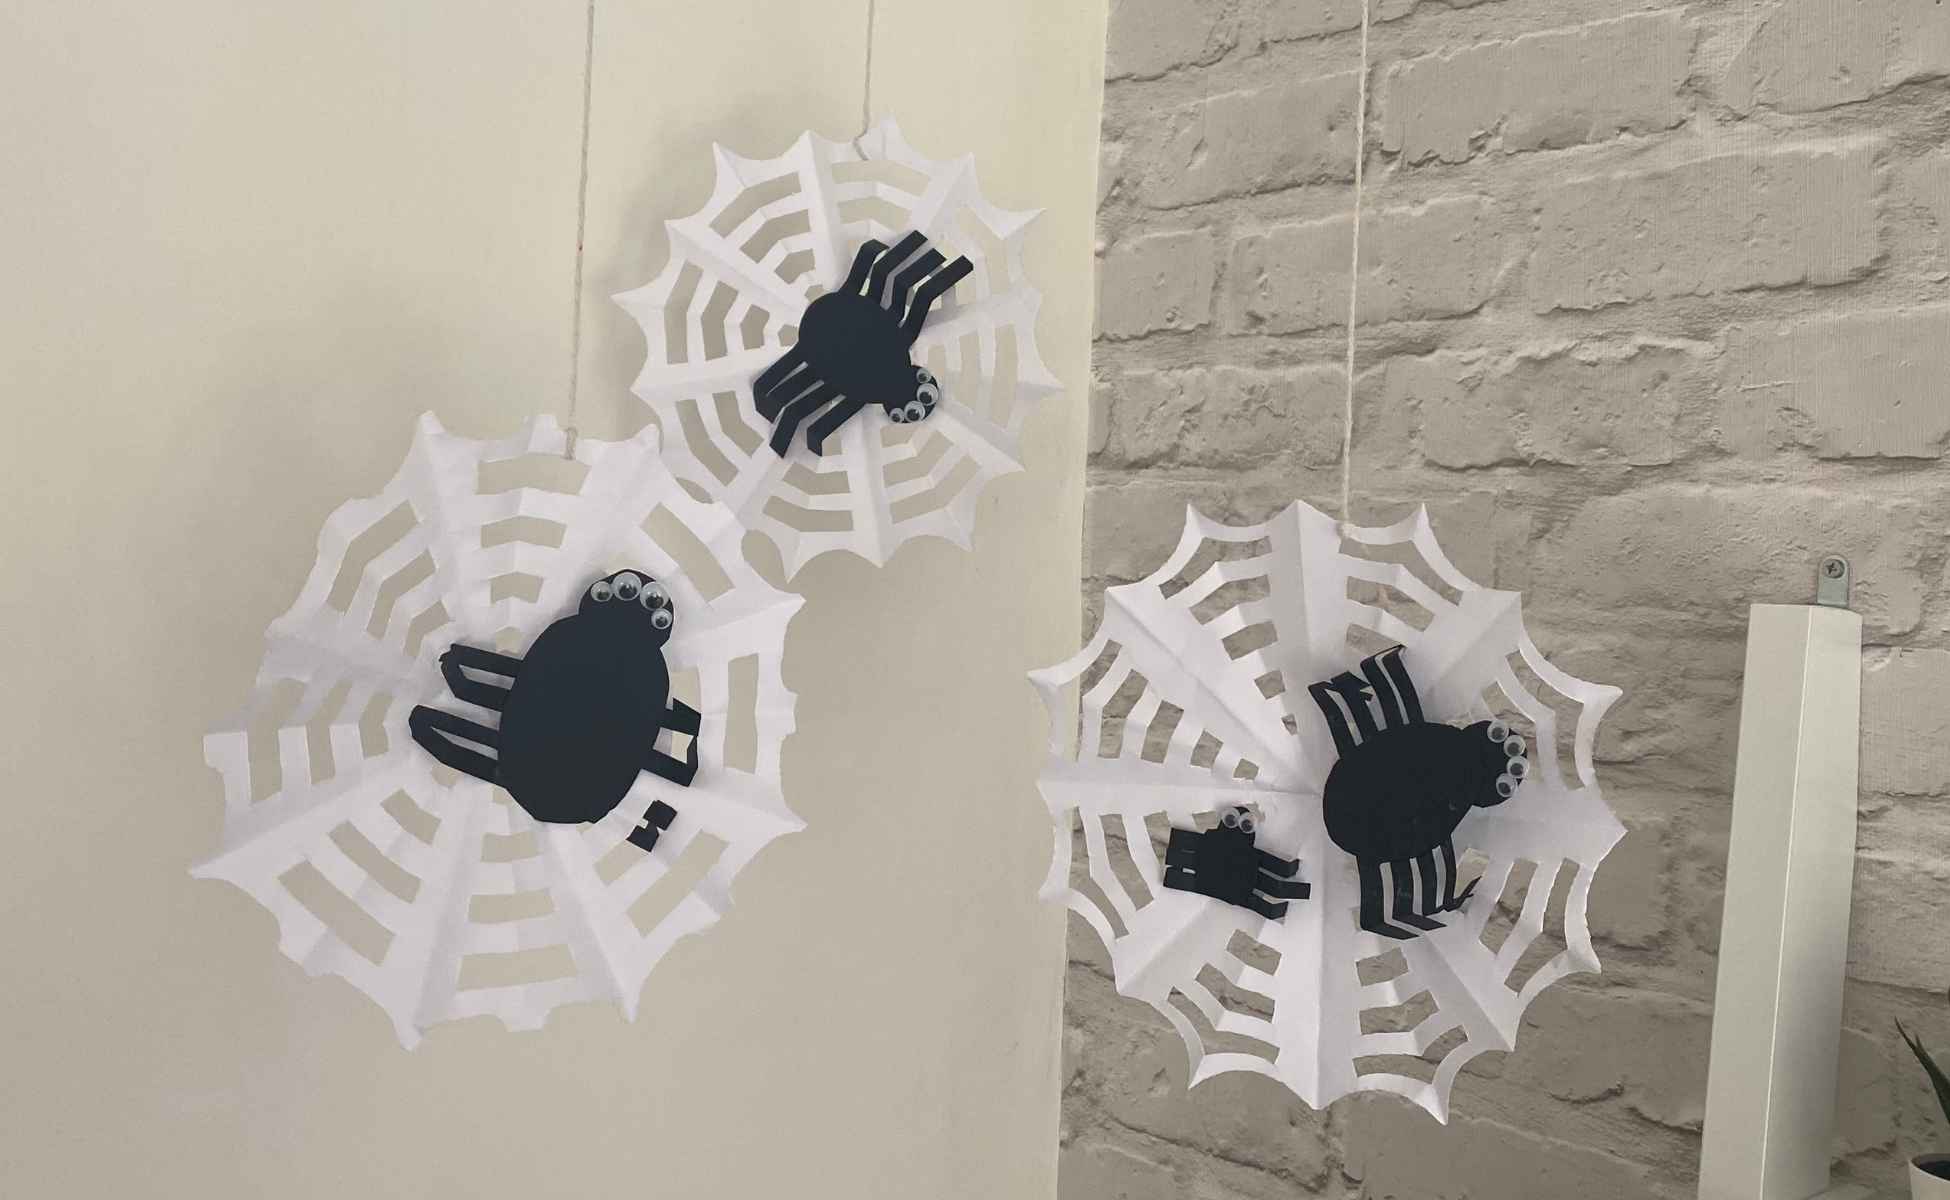 Make and talk activity: Make a paper spider and spider web